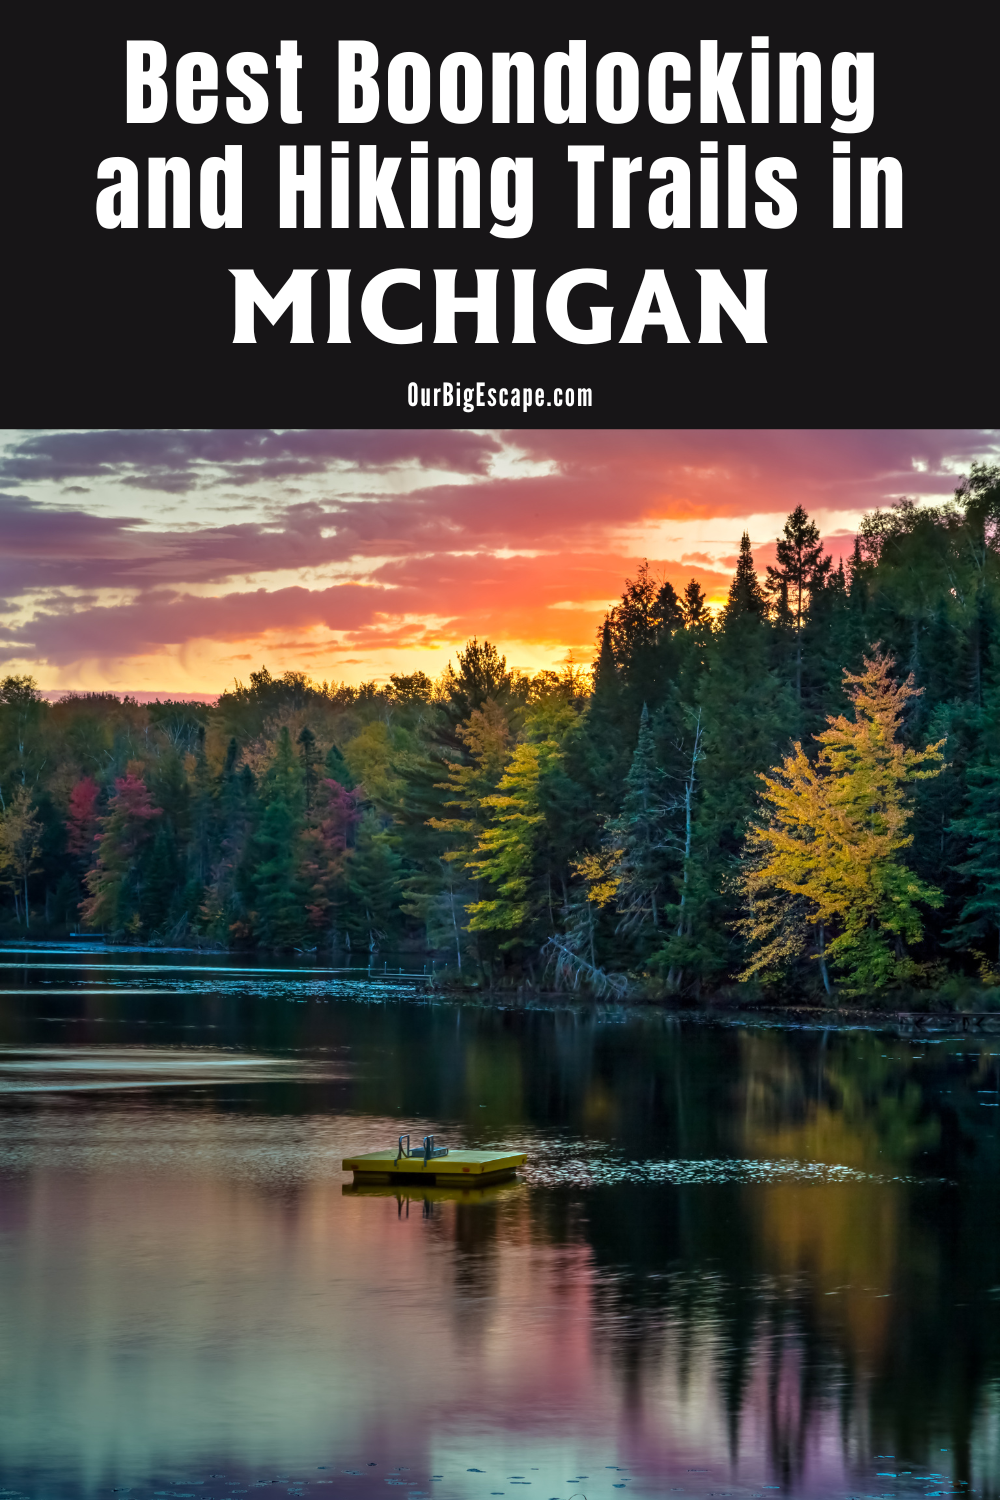 Best Boondocking and Hiking Trails in Michigan